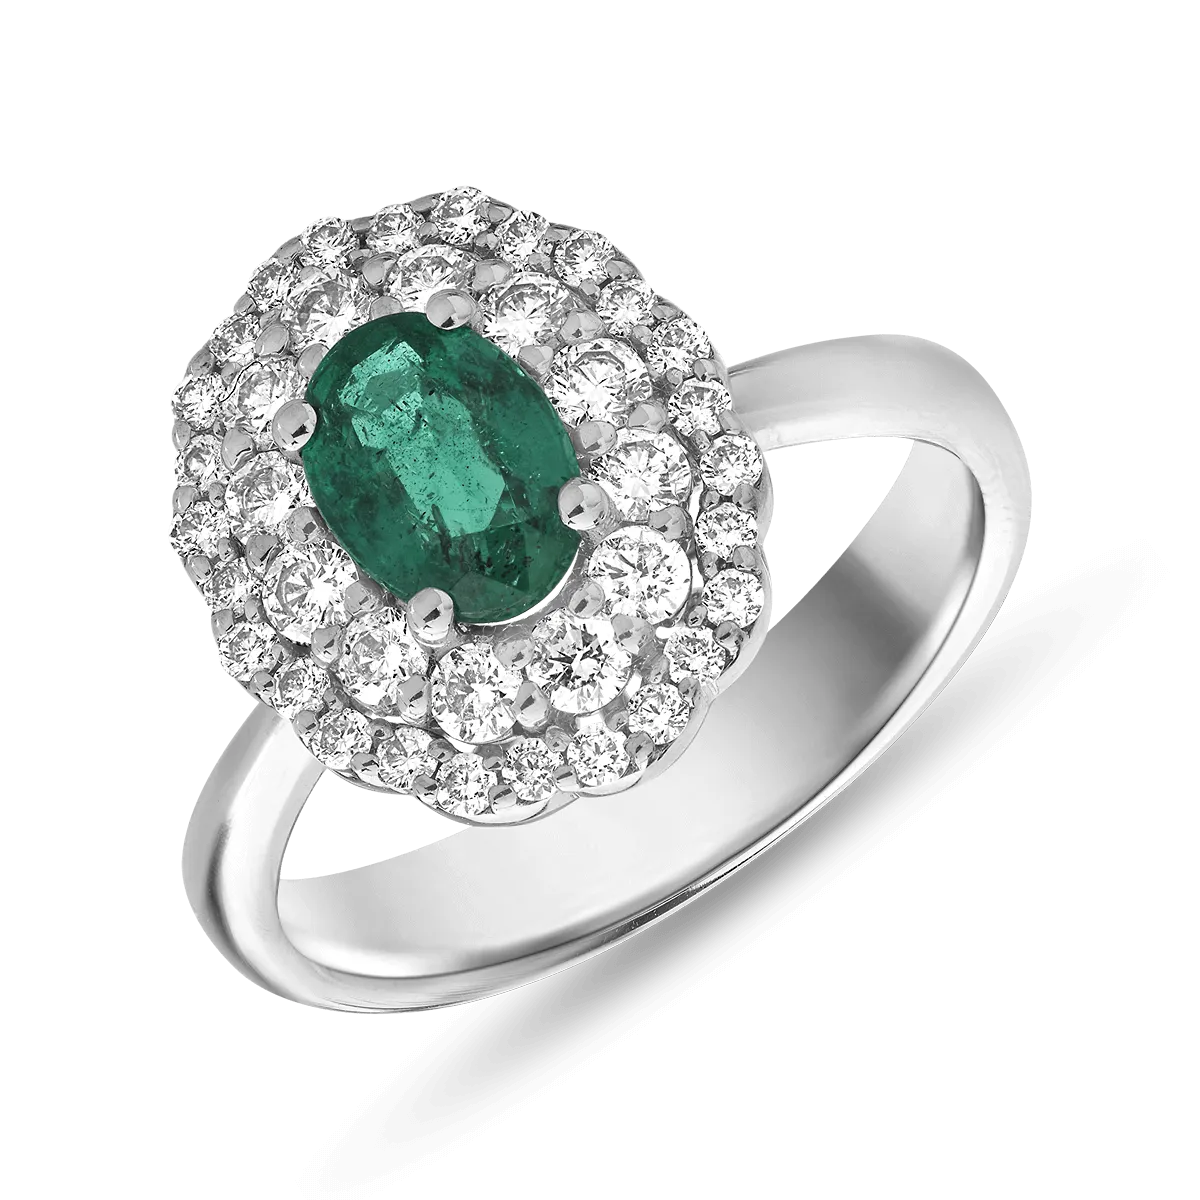 18K white gold ring with 0.71ct emerald and 0.56ct diamonds